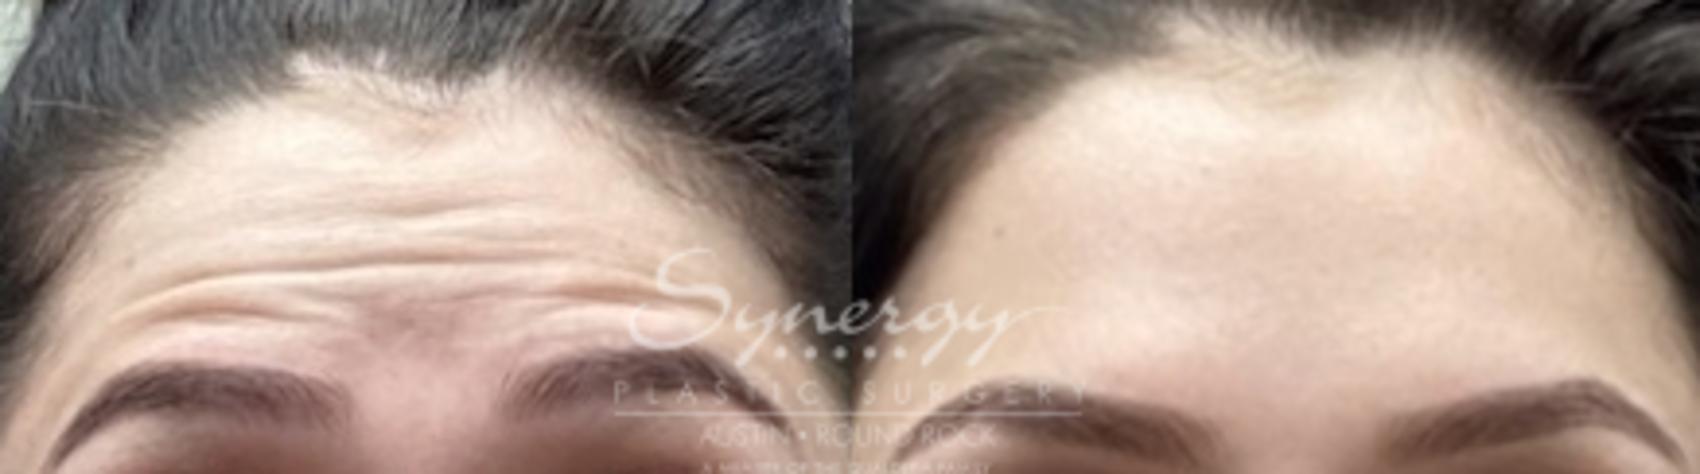 Debunking TikTok's Face Taping Trend – Synergy Plastic Surgery